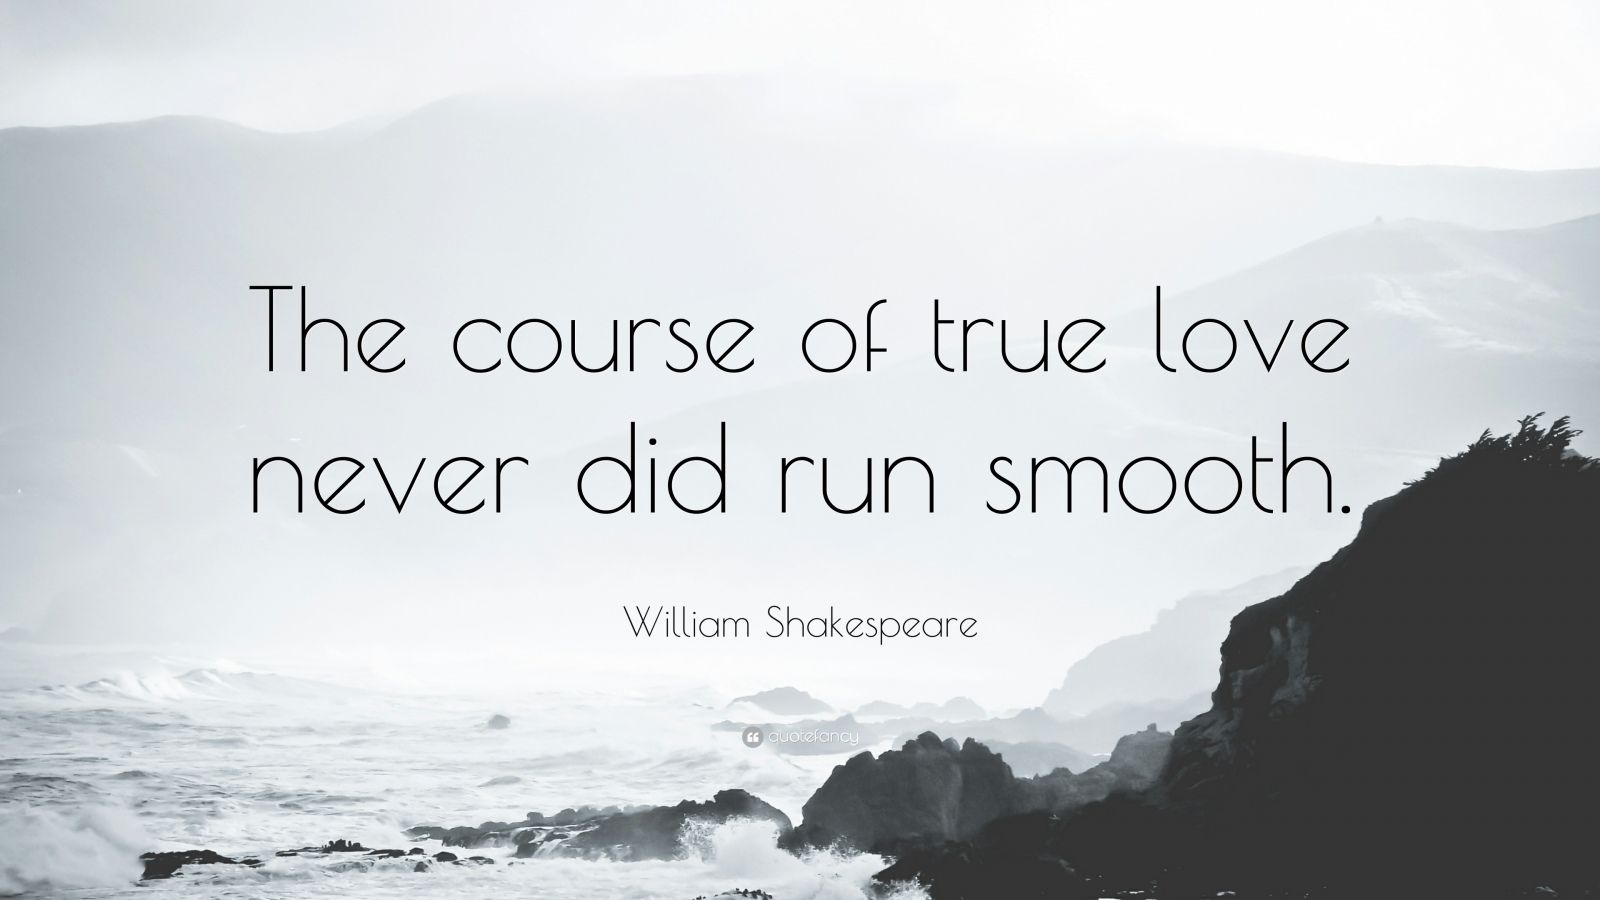 The course of true love never did run smooth essay help